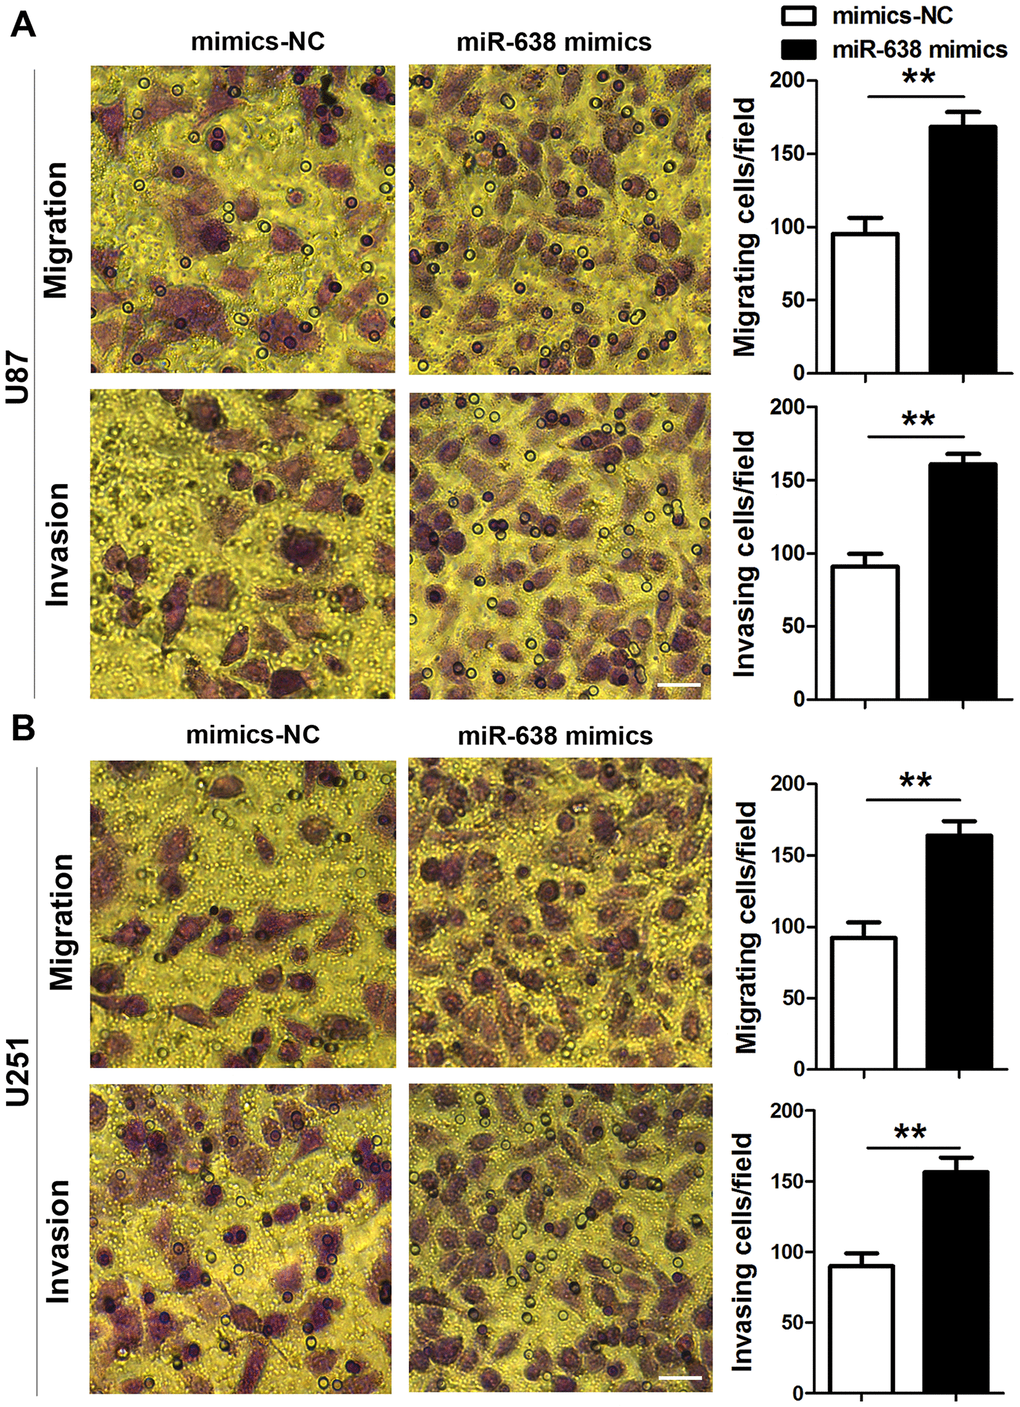 Overexpression of miR-638 promotes glioma cell migration and invasion. (A, B) U87 and U251 glioma cells were transfected with miR-638 mimics, and both cells migration and invasion were determined using transwell assays. Results represent the mean±SD for three independent experiments (**pt-test). Scale bar = 50 μm in all panels.